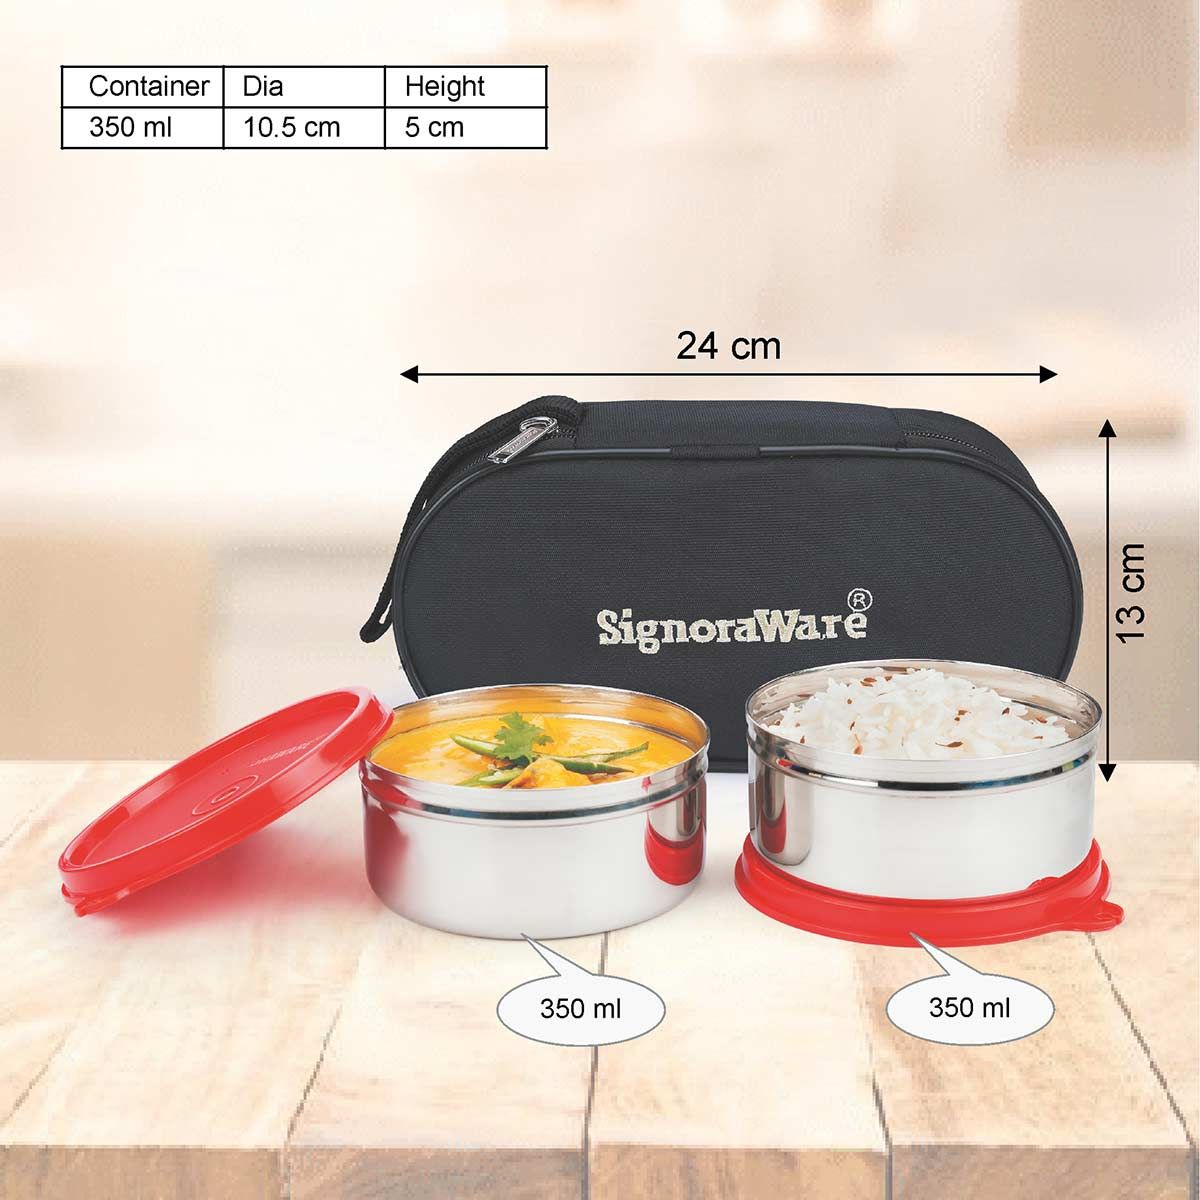 Signoraware Midday Maxx Fresh Steel Stainless Steel Lunch Box with Bag